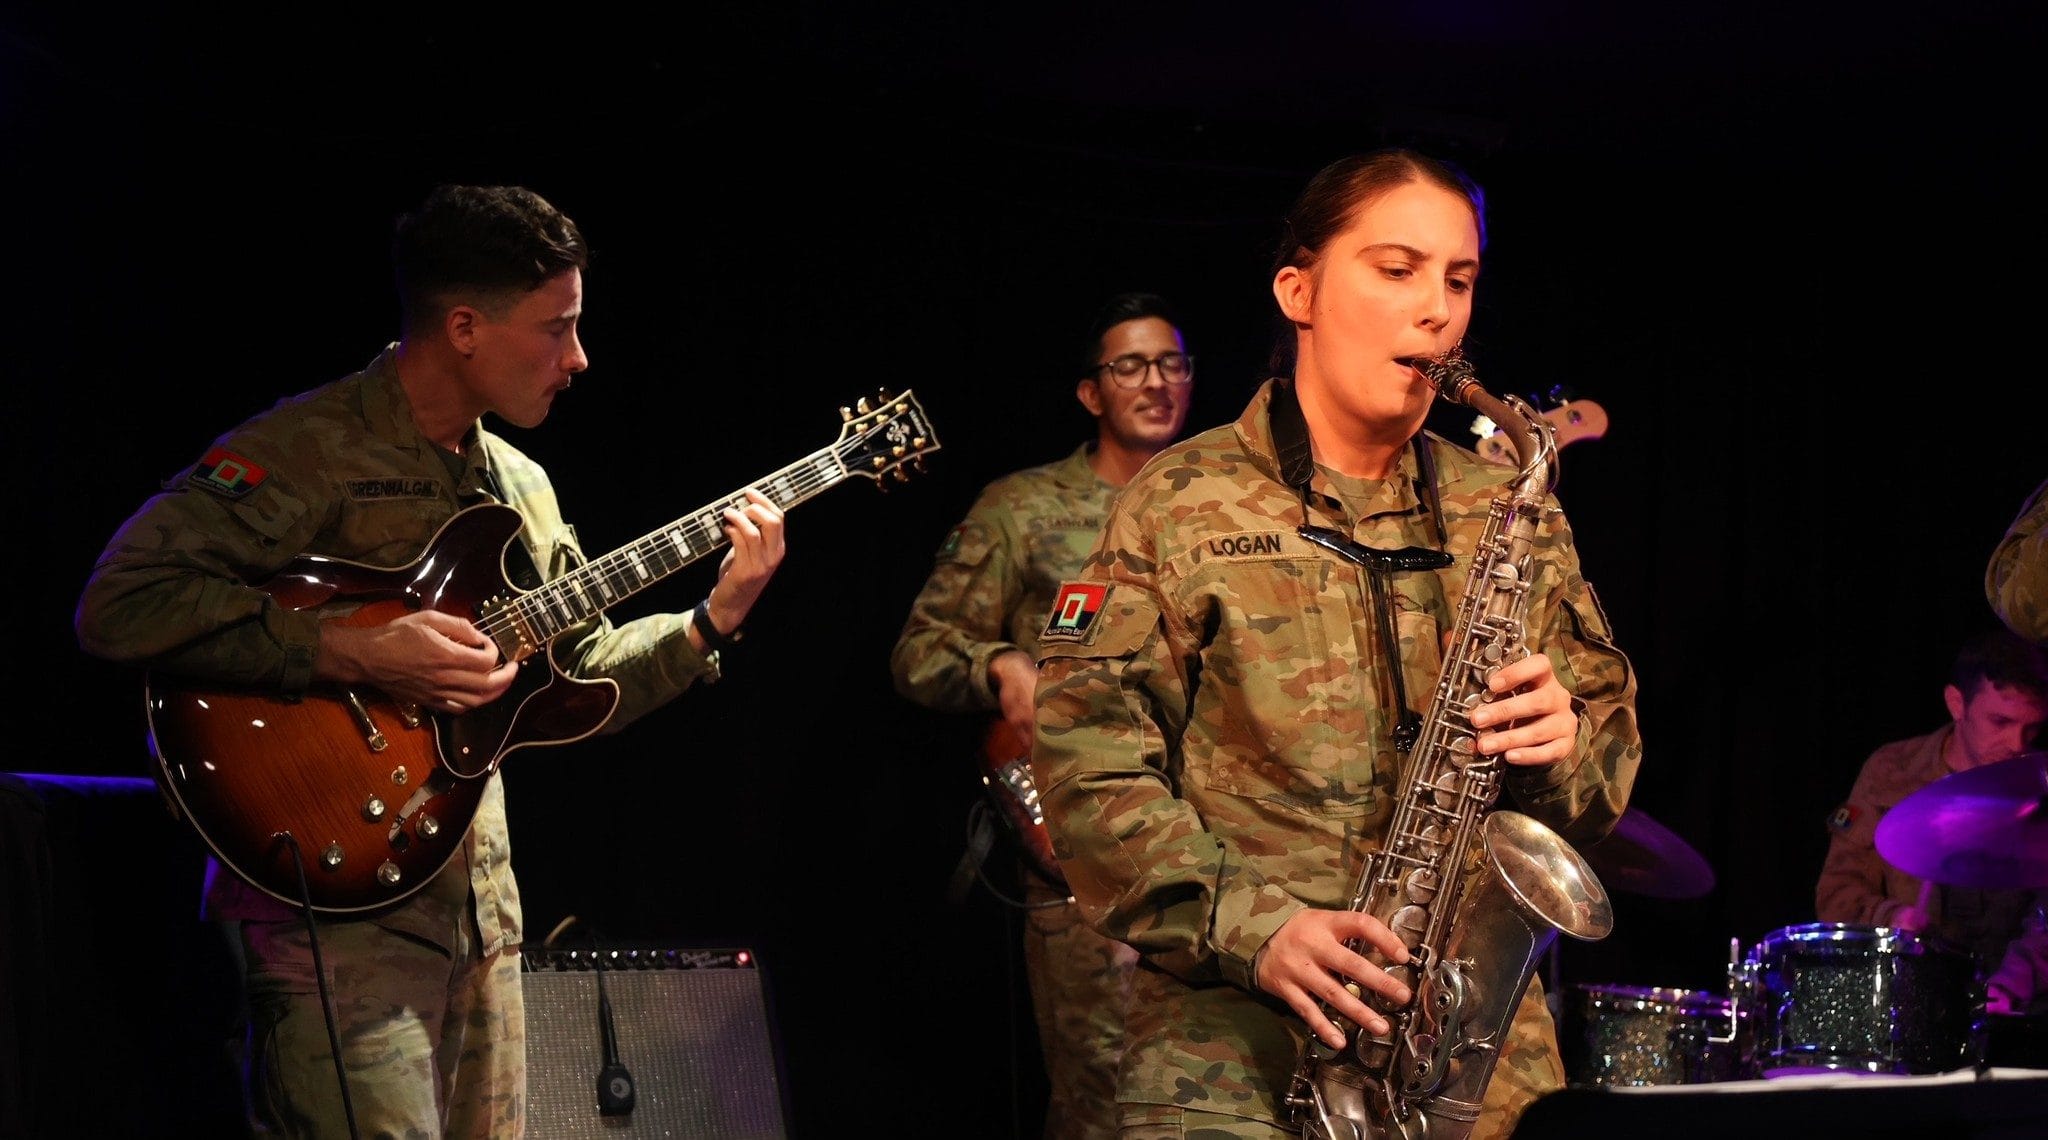 Erin Logan performing saxophone with the Australian Army Band